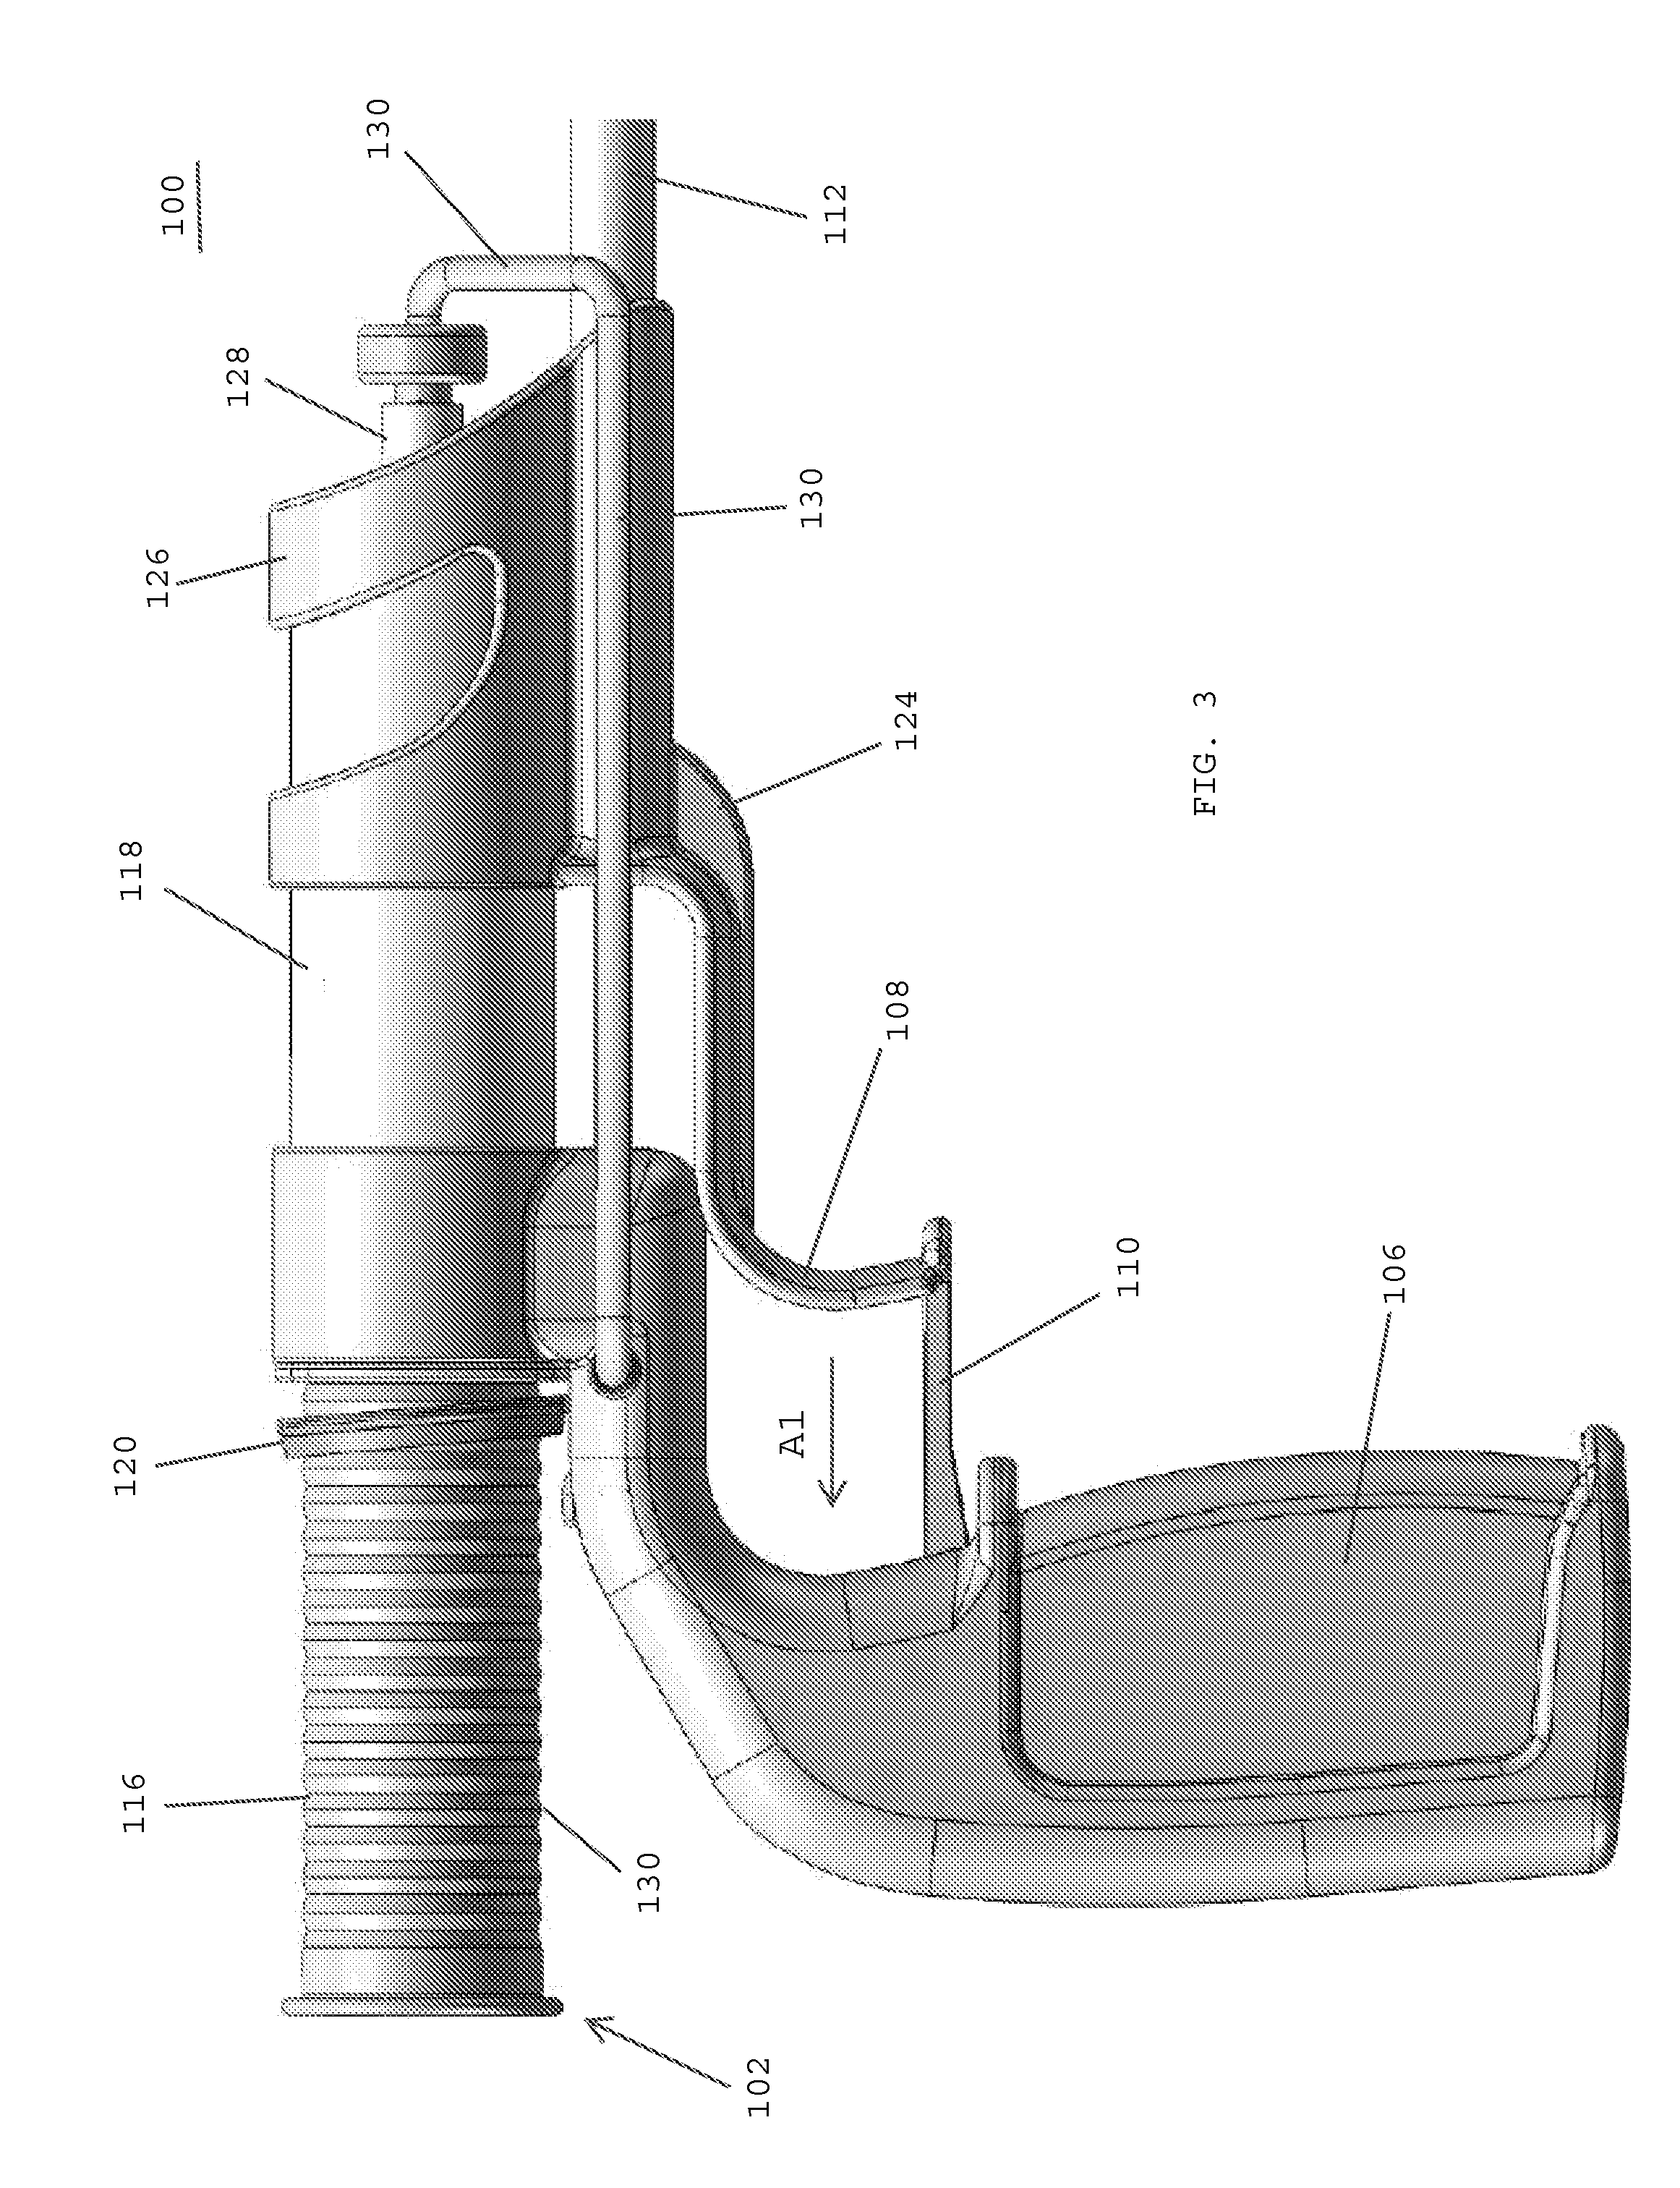 Applicator instruments for the delivery, deployment, and tamponade of hemostats and methods therefor